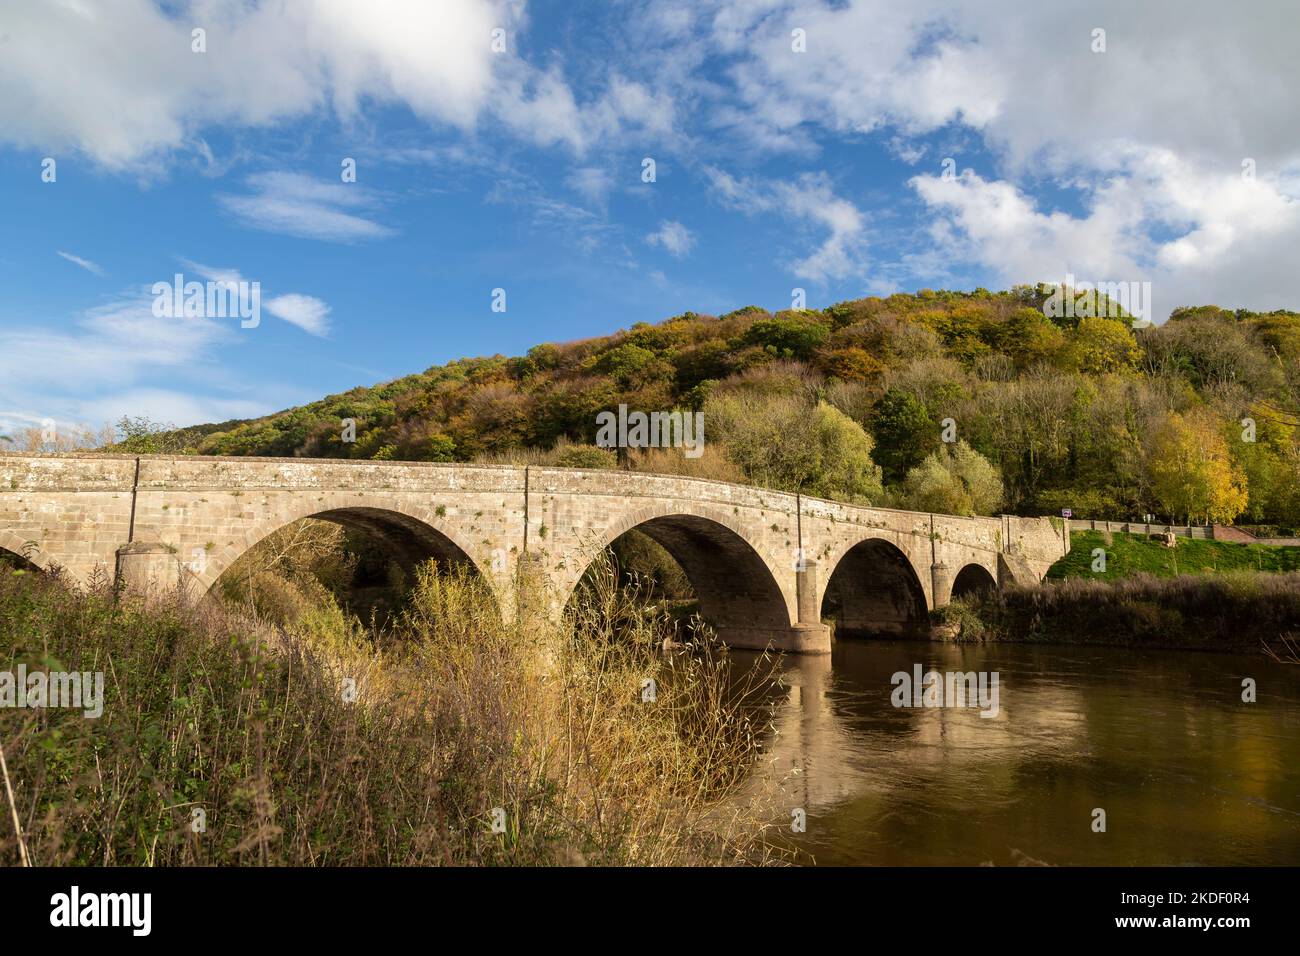 Kerne Bridge on the River Wye in Herefordshire, England.  Built 1825-28. A scheduled monument. Stock Photo